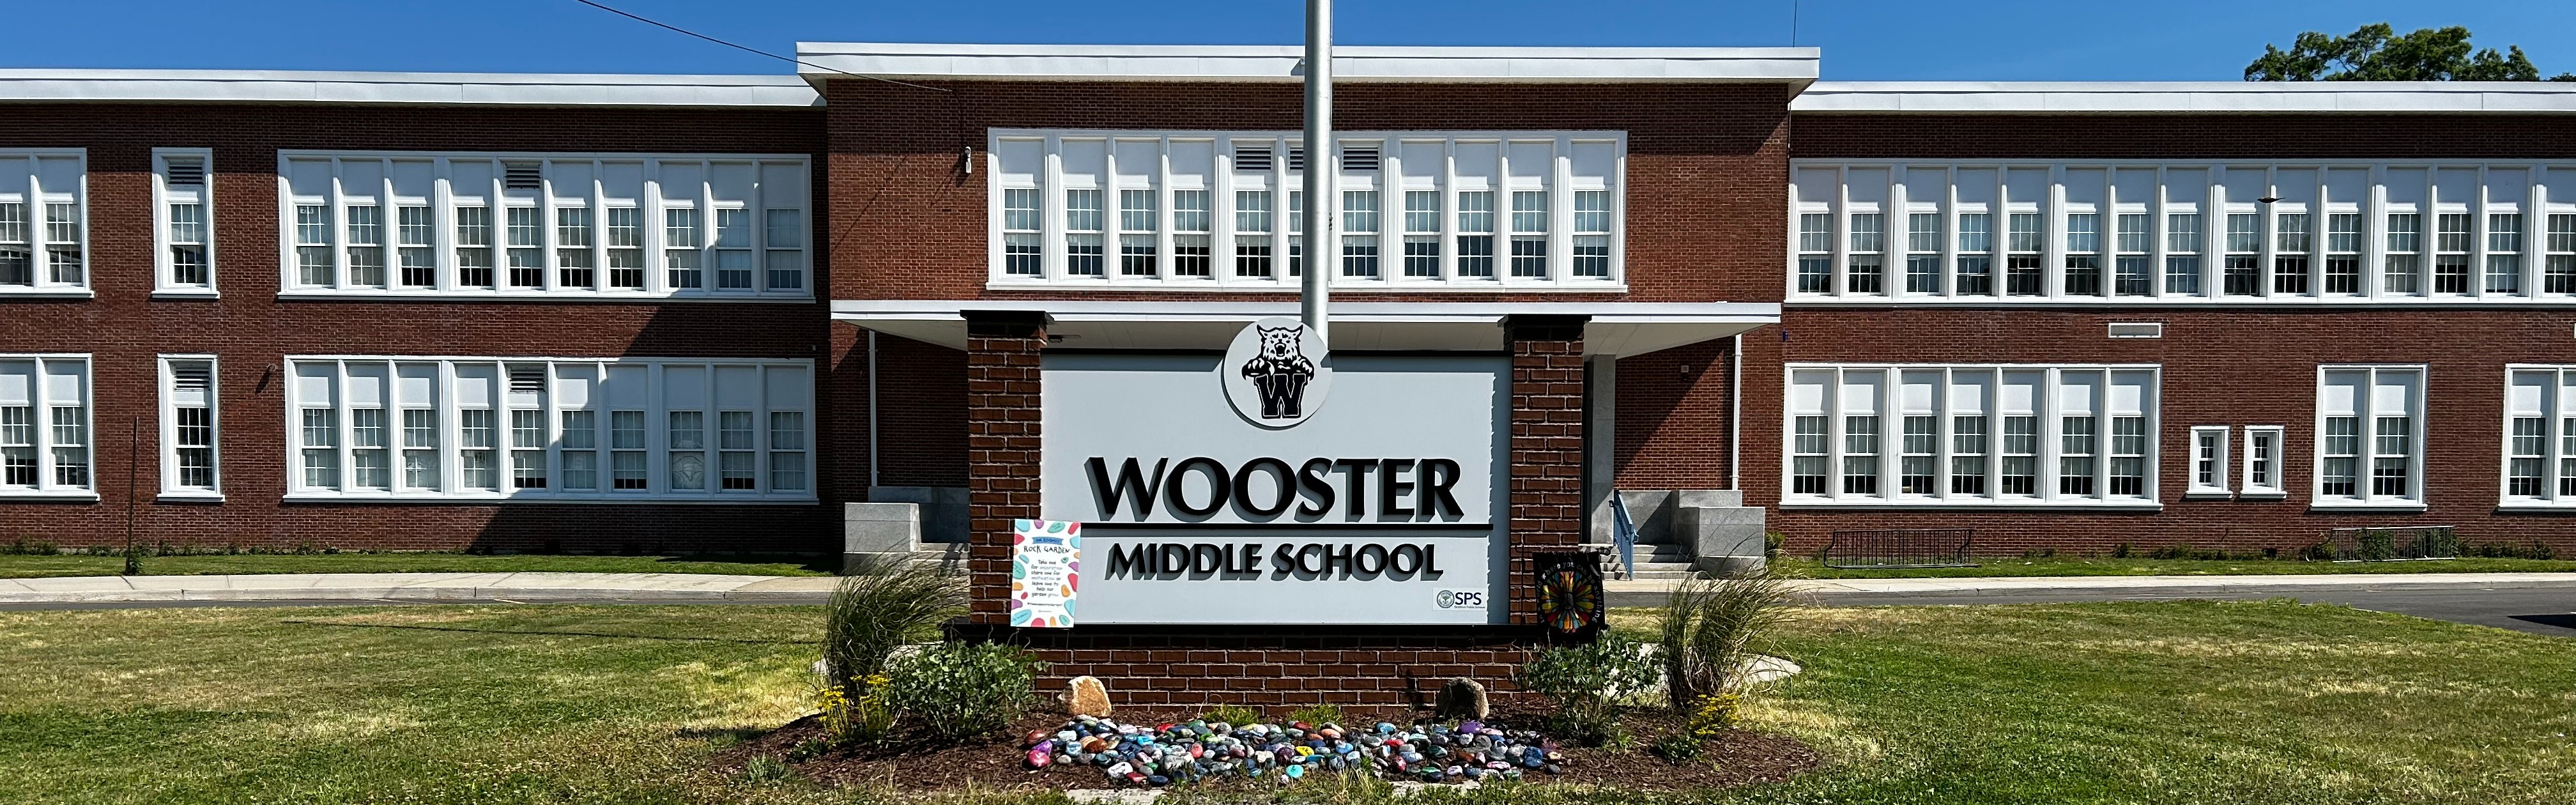 Wooster Sign